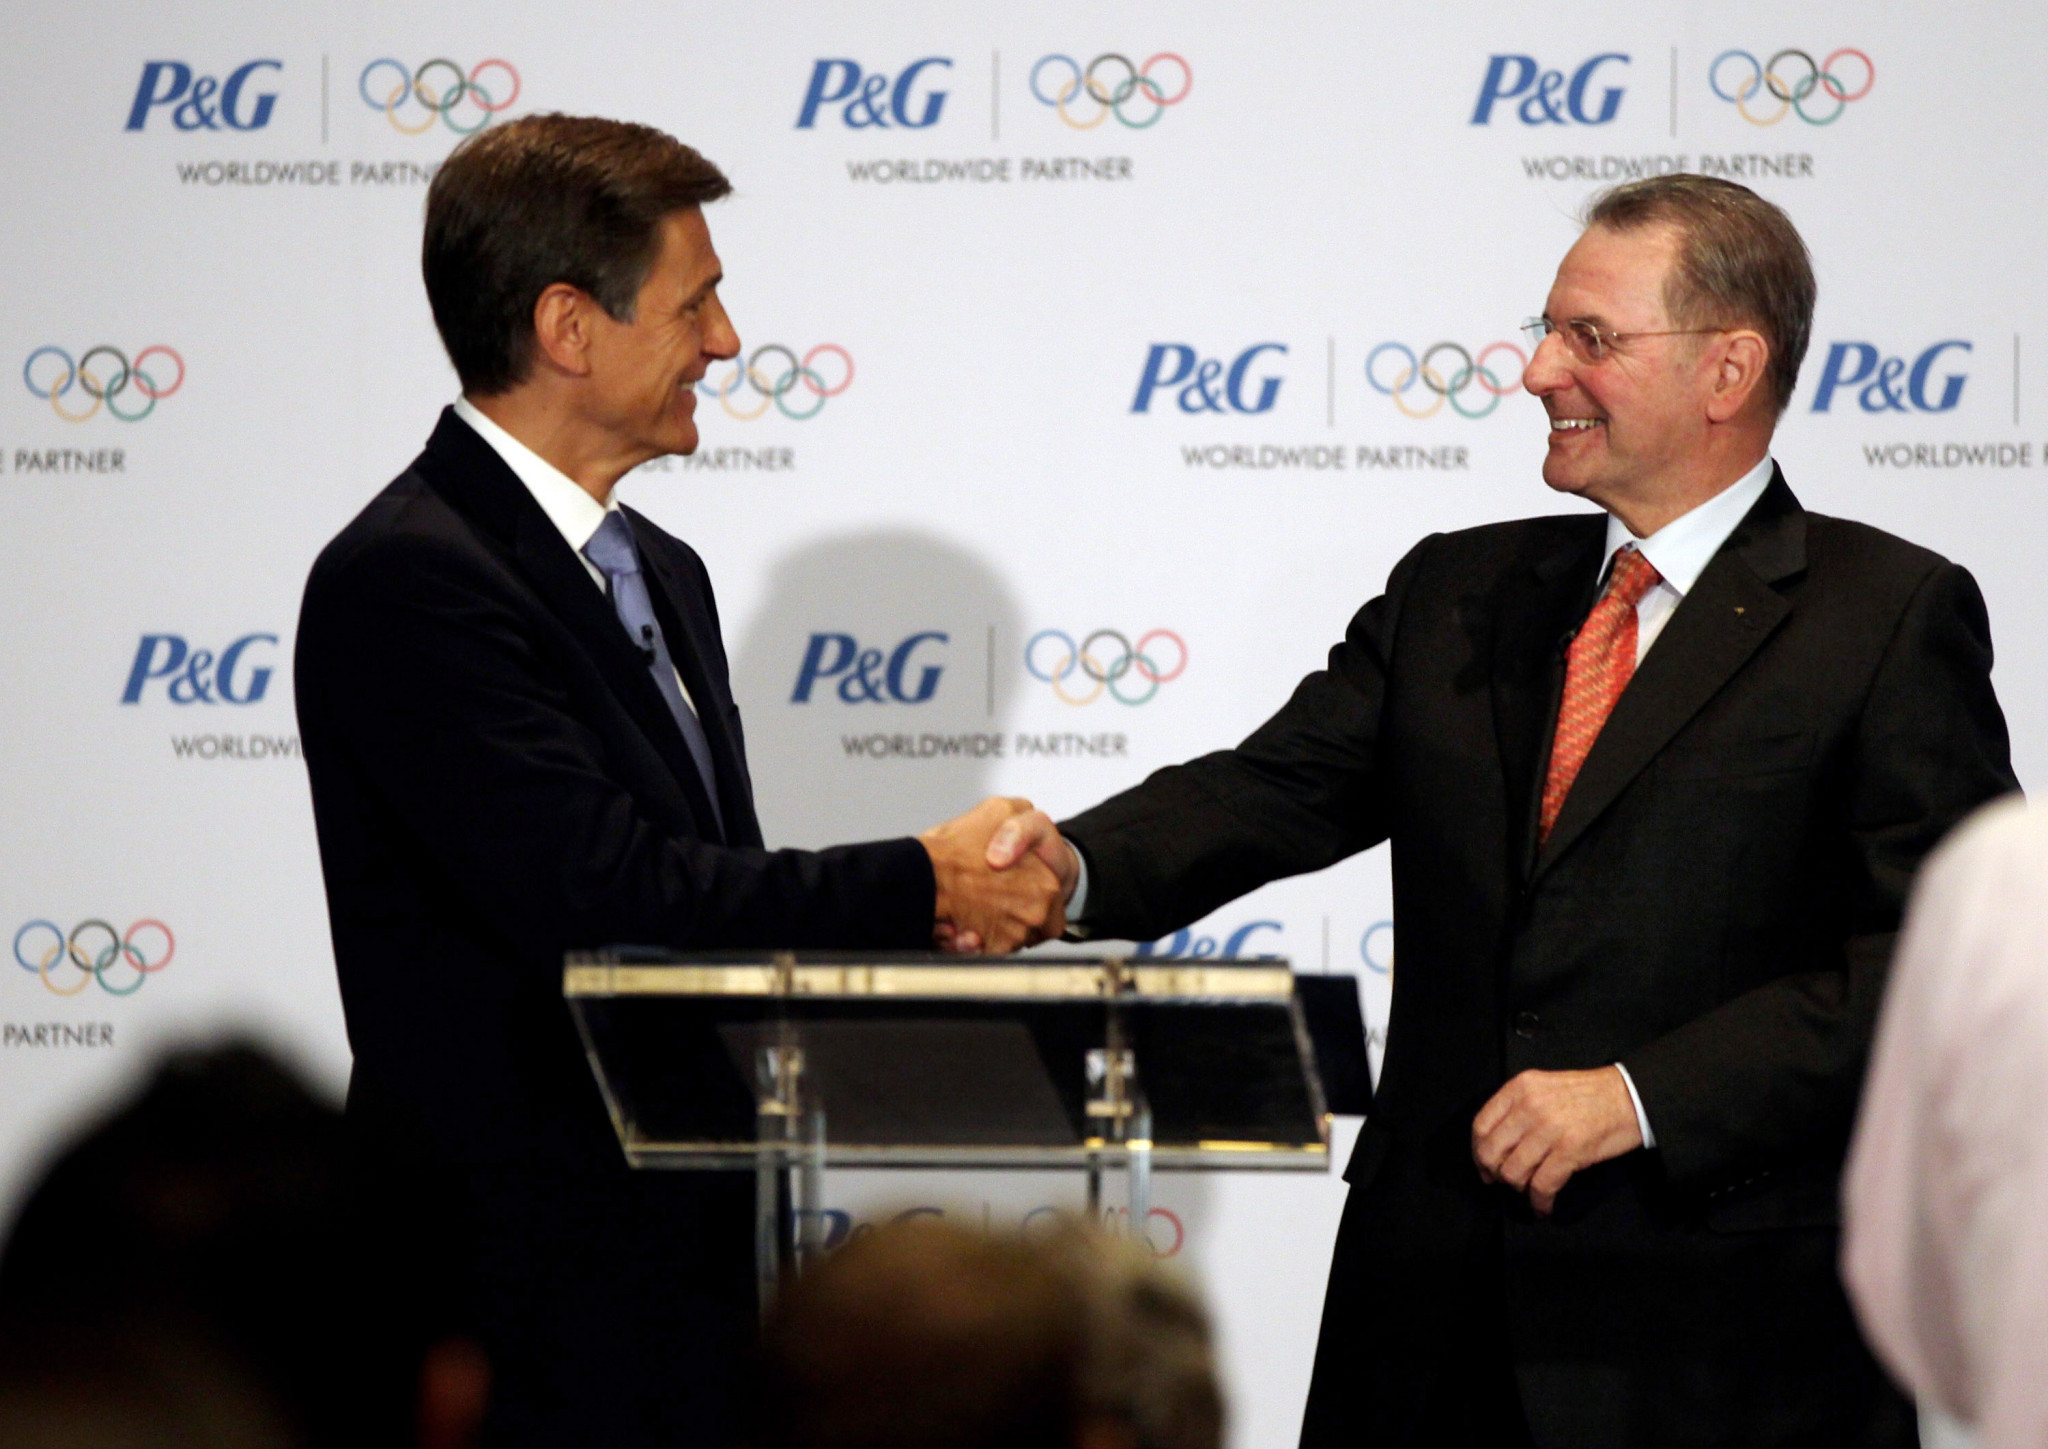 Former IOC President Jacques Rogge signed the initial deal with P&G in 2010 ©Getty Images